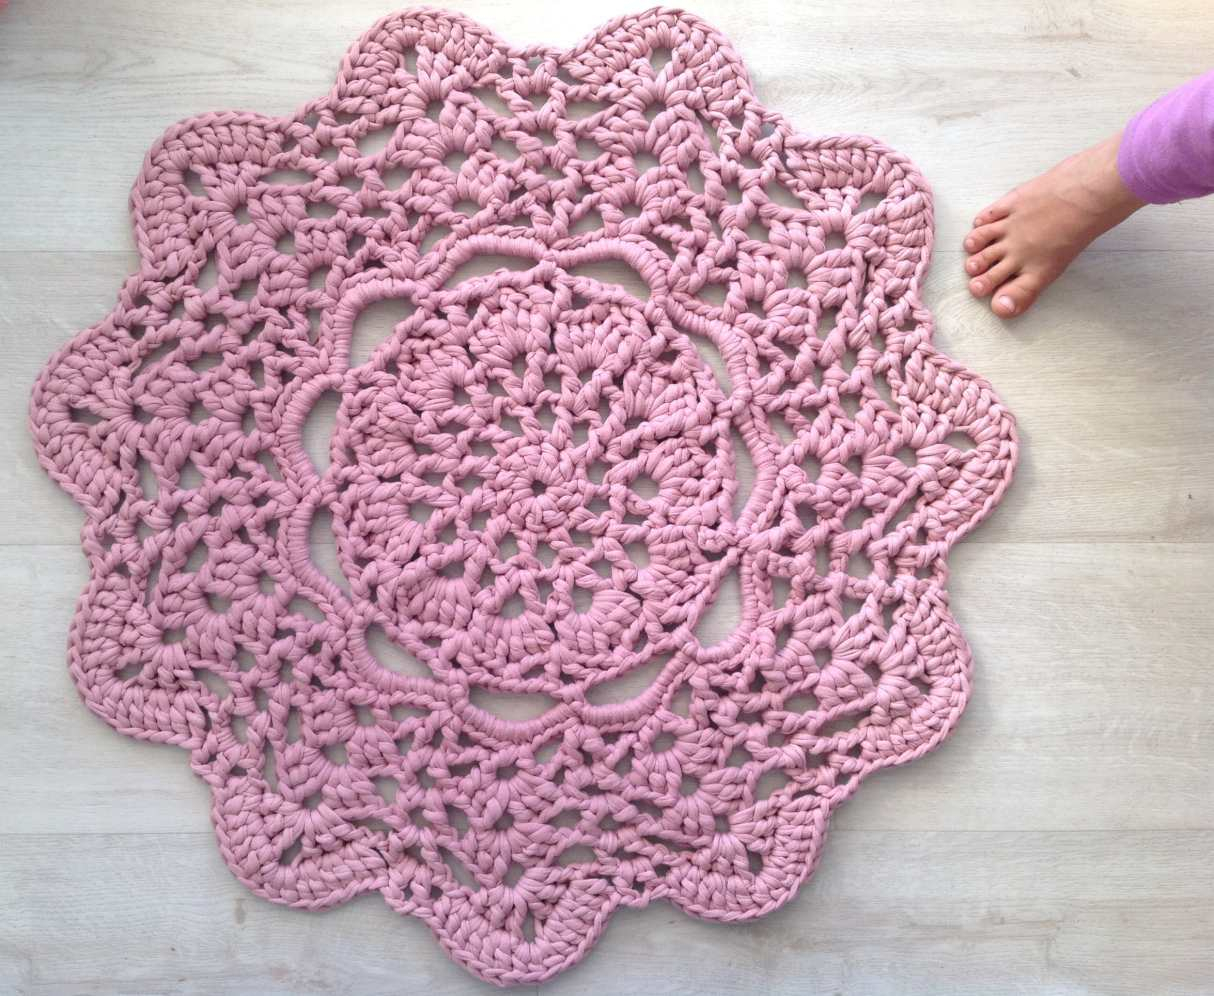 Crochet Doily Patterns 10 Free Thread And Lace Crochet Doily Patterns